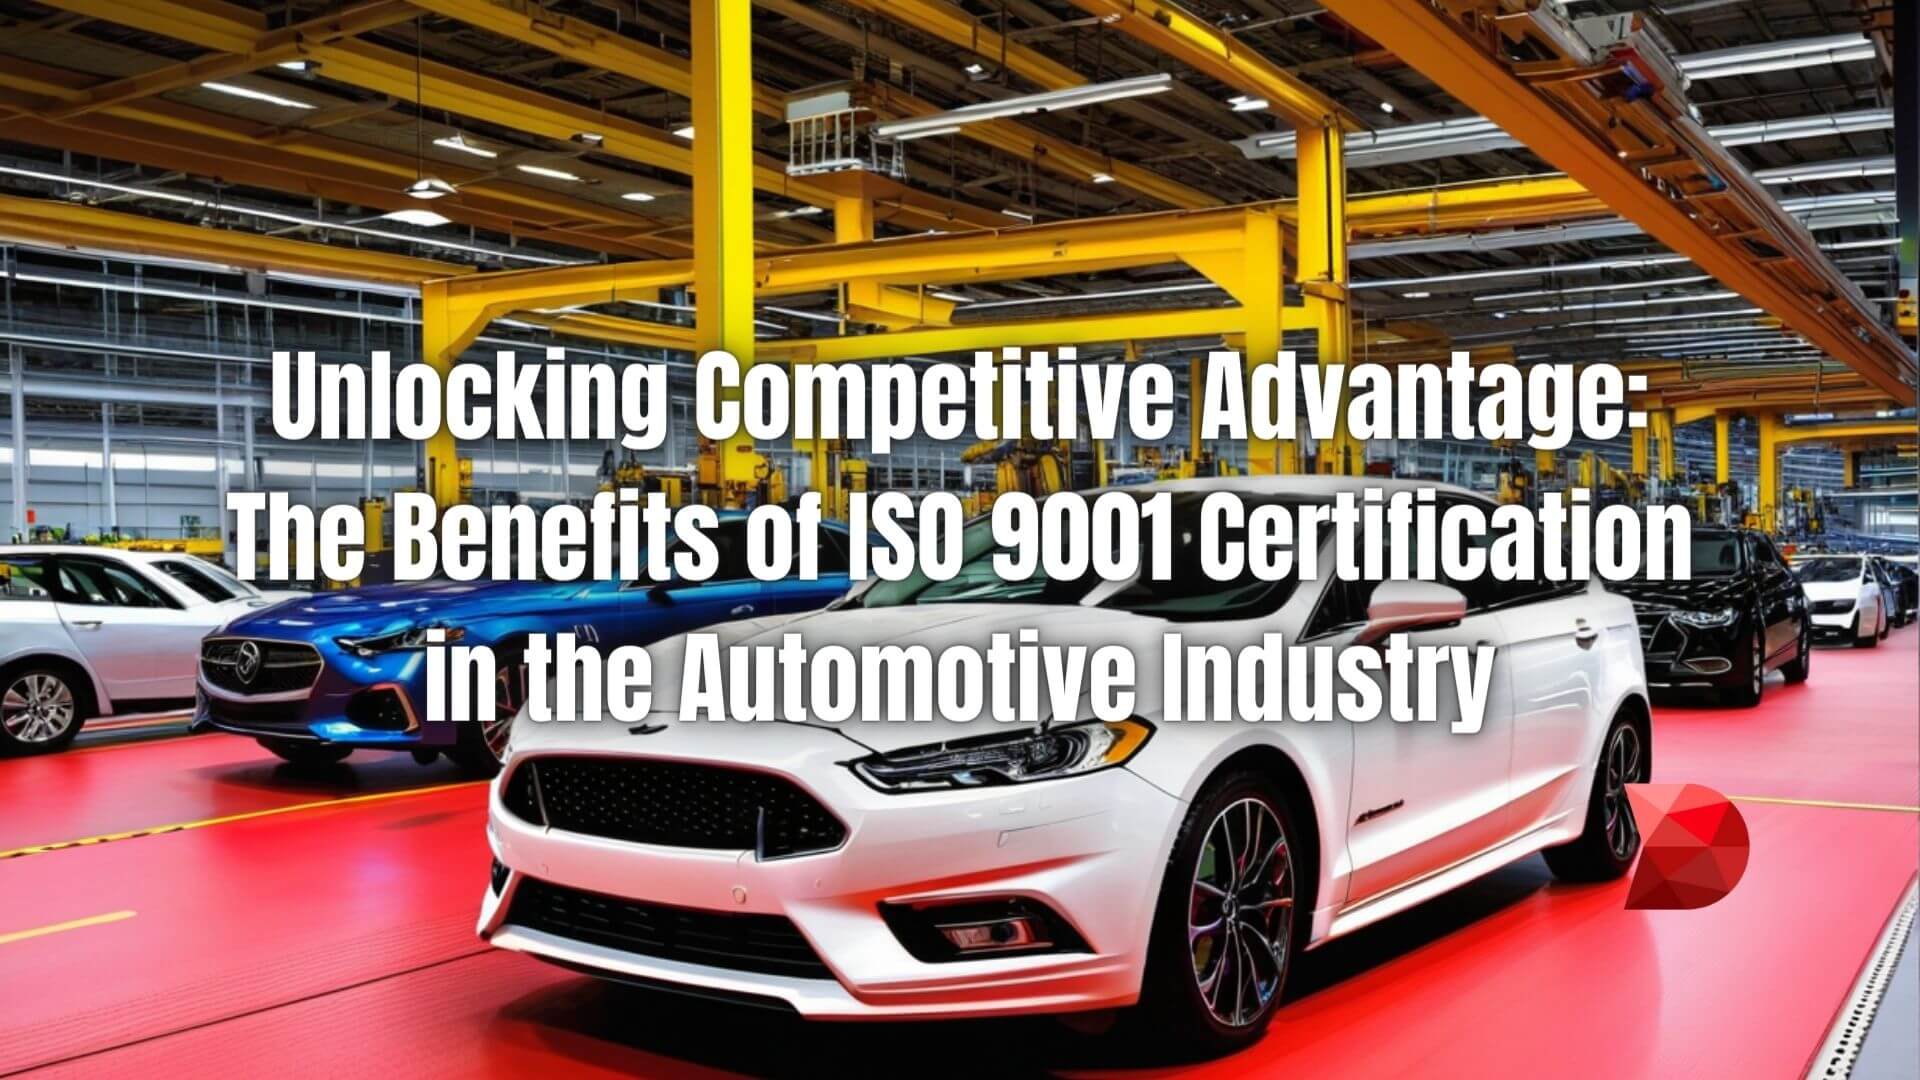 ISO 9001 certification offers several tangible benefits to automotive businesses. Click here to learn what it is and its benefits!